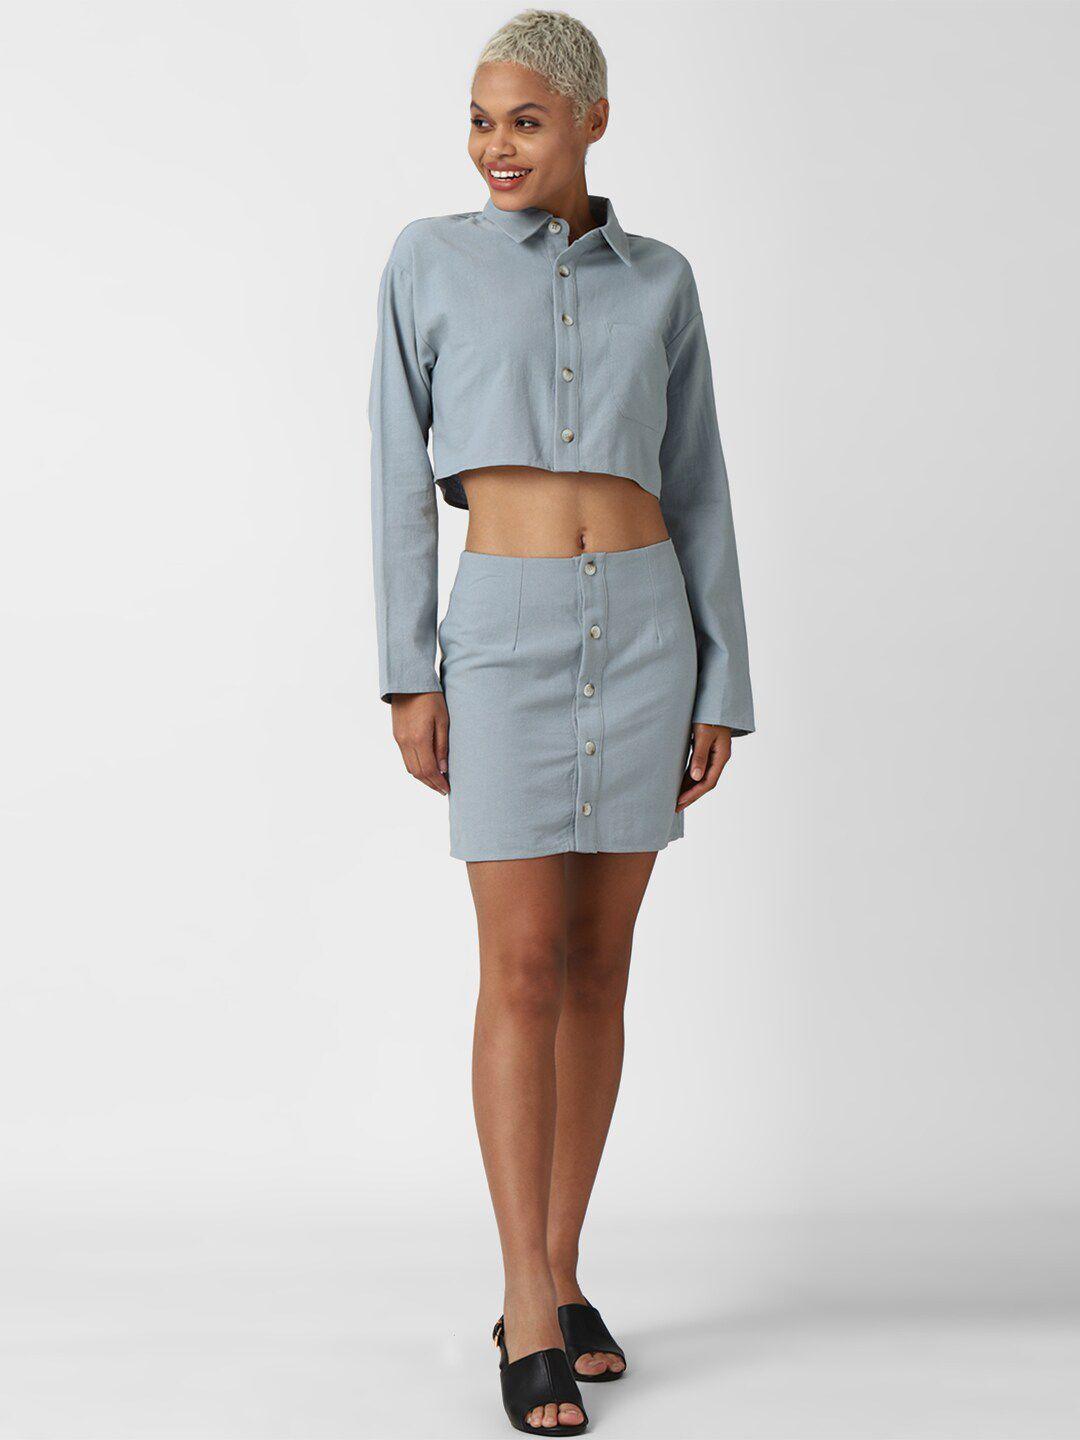 forever 21 women grey solid shirt with skirt